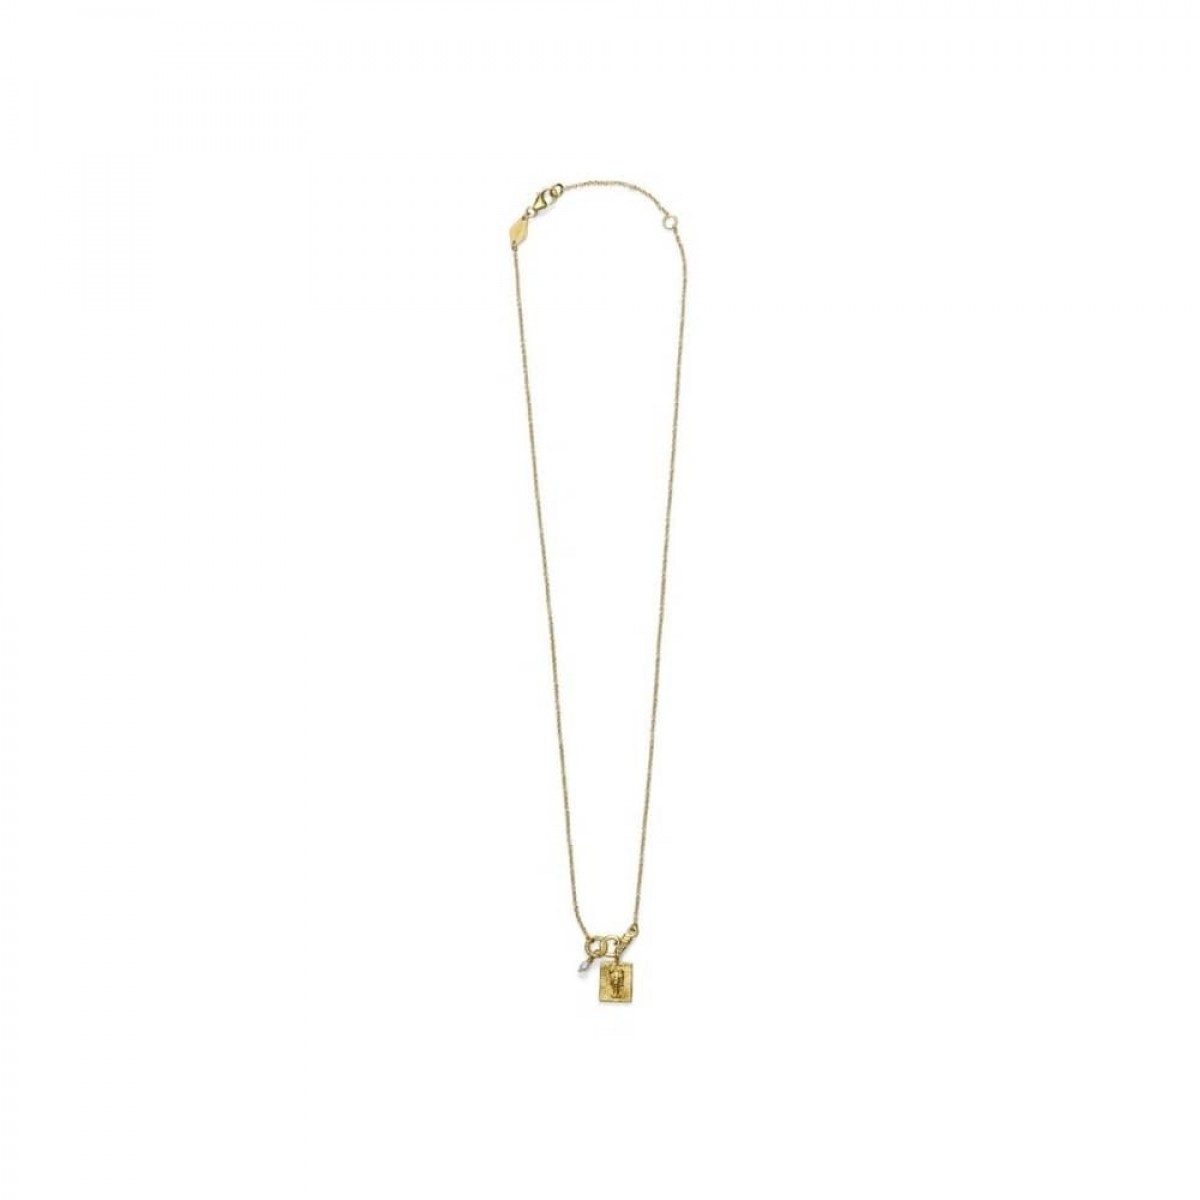 anni lu the gold life necklace - gold - front